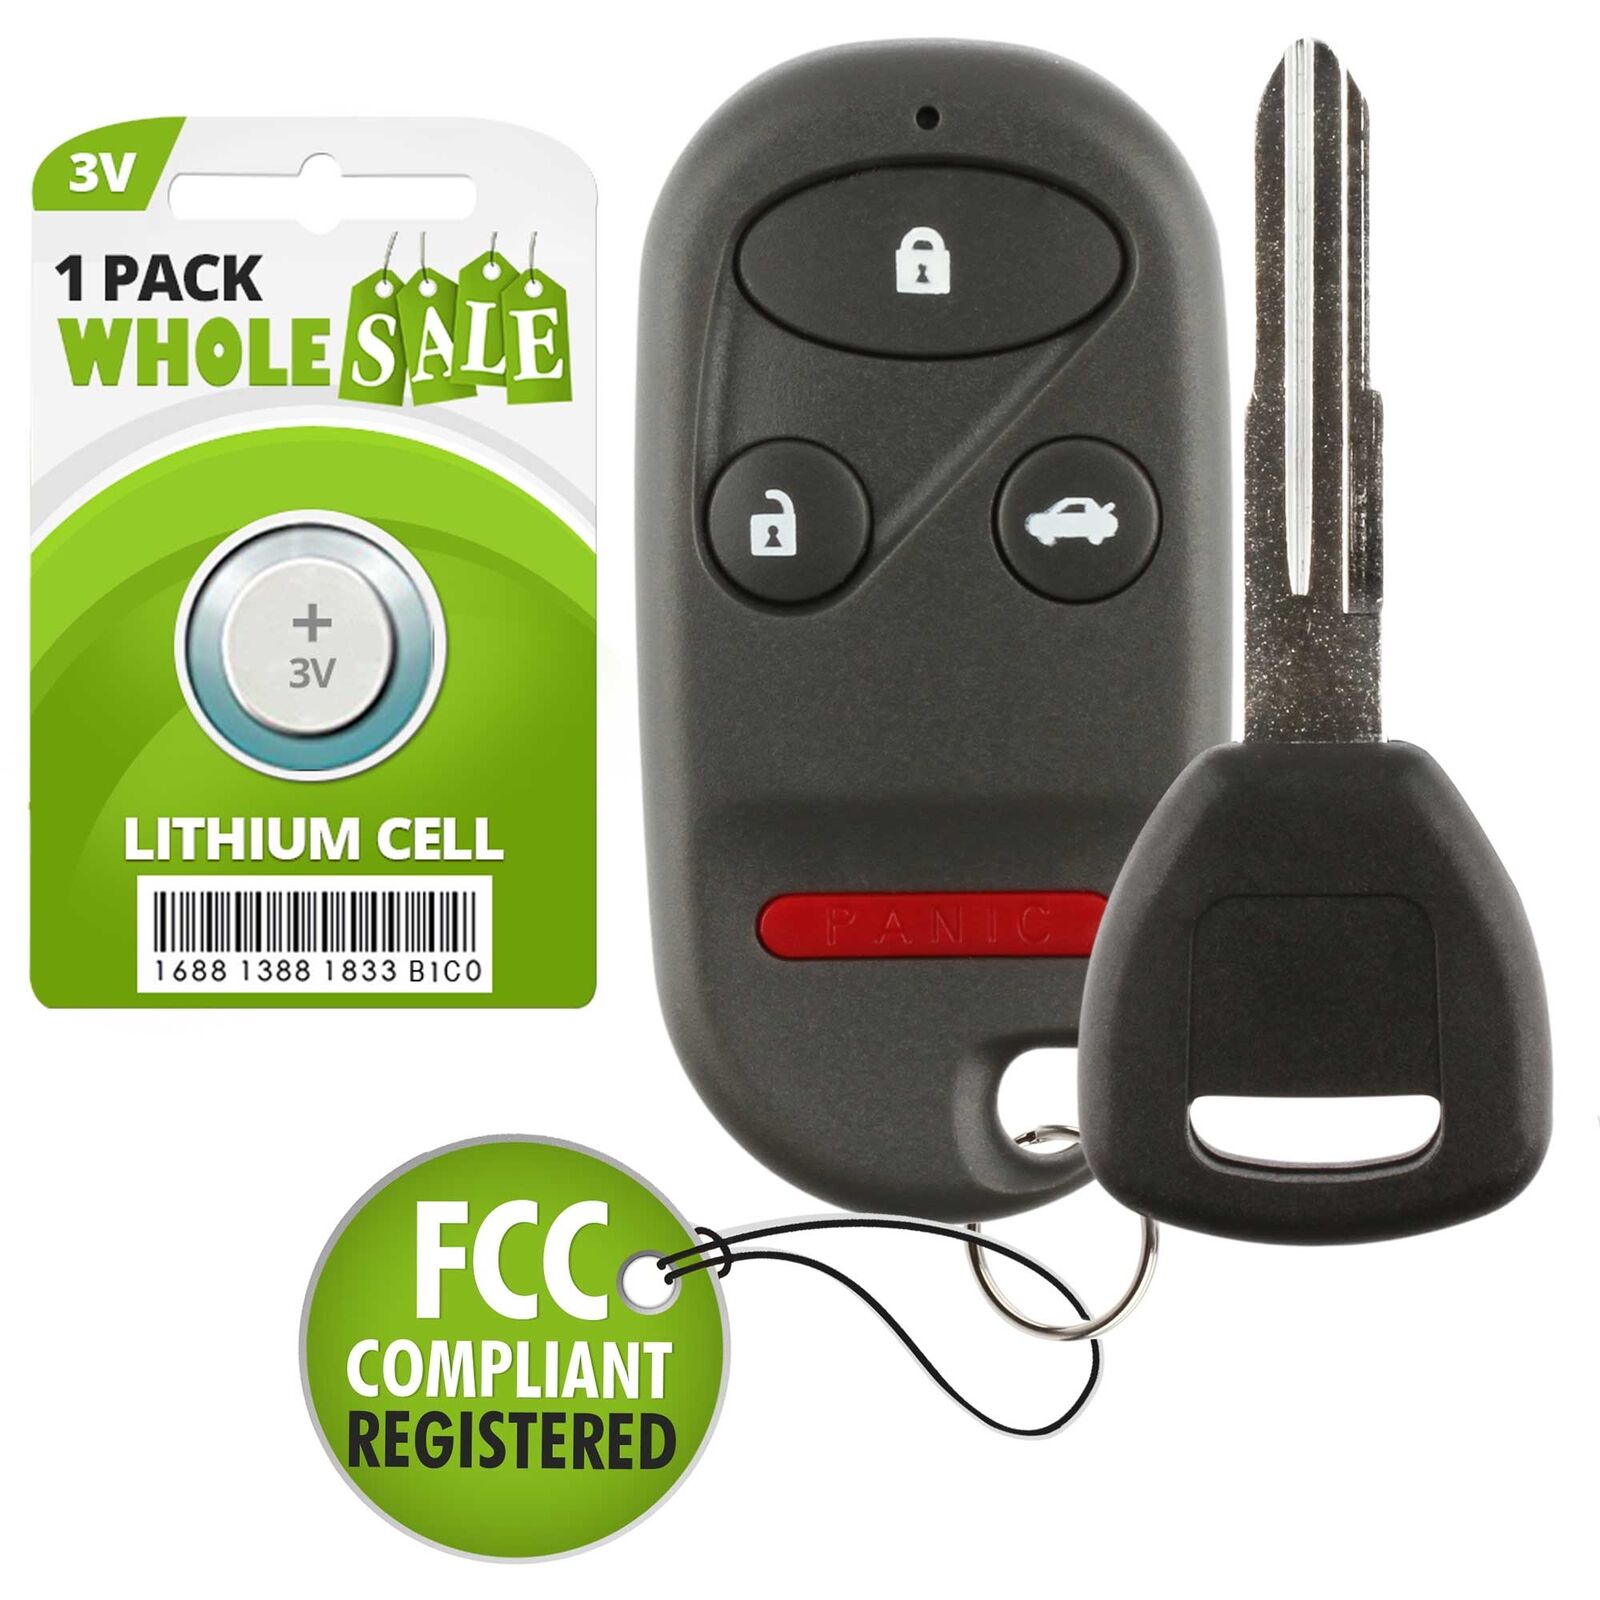 Replacement For 98 99 00 01 02 1998 1999 2000 2001 2002 Honda Accord Key + Fob